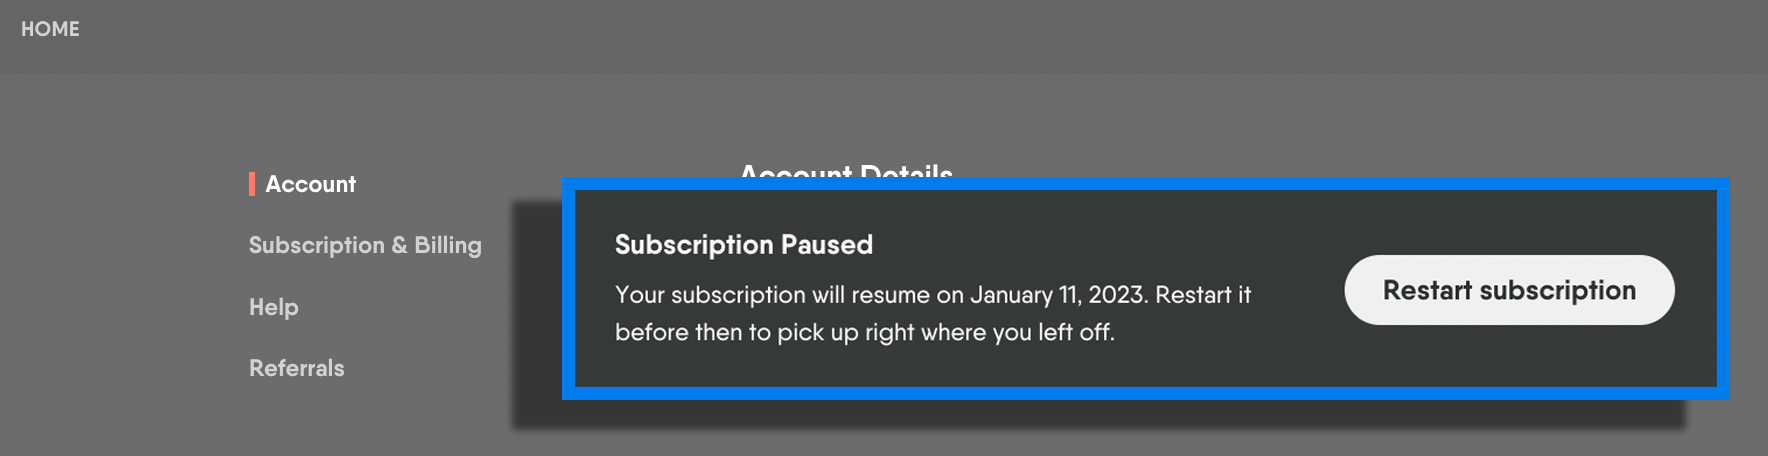 Details for a paused account on the FuboTV MY ACCOUNT page including the date the accont will un-pause and a RESTART SUBSCRIPTION button to restart early